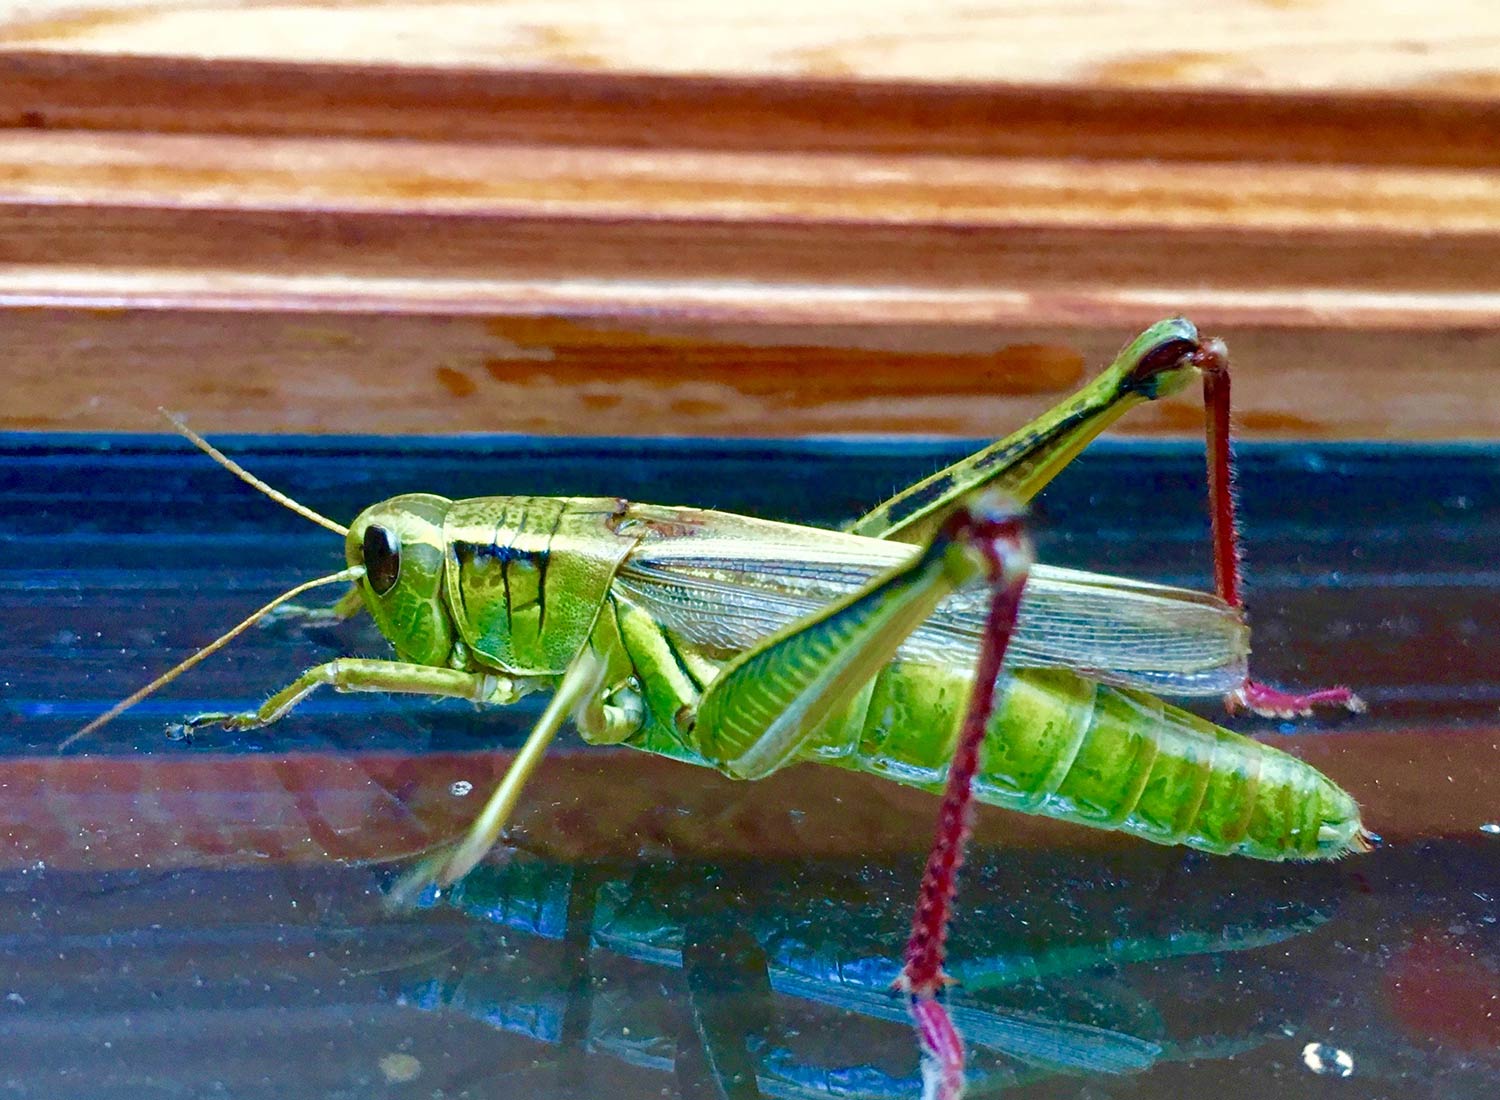 Sanctuary at SHO: redefining animal agriculture | partnering with wildlife, even small insects like this grasshopper, to steward non-harming perennial food systems while ensuring safe & healthy habitat